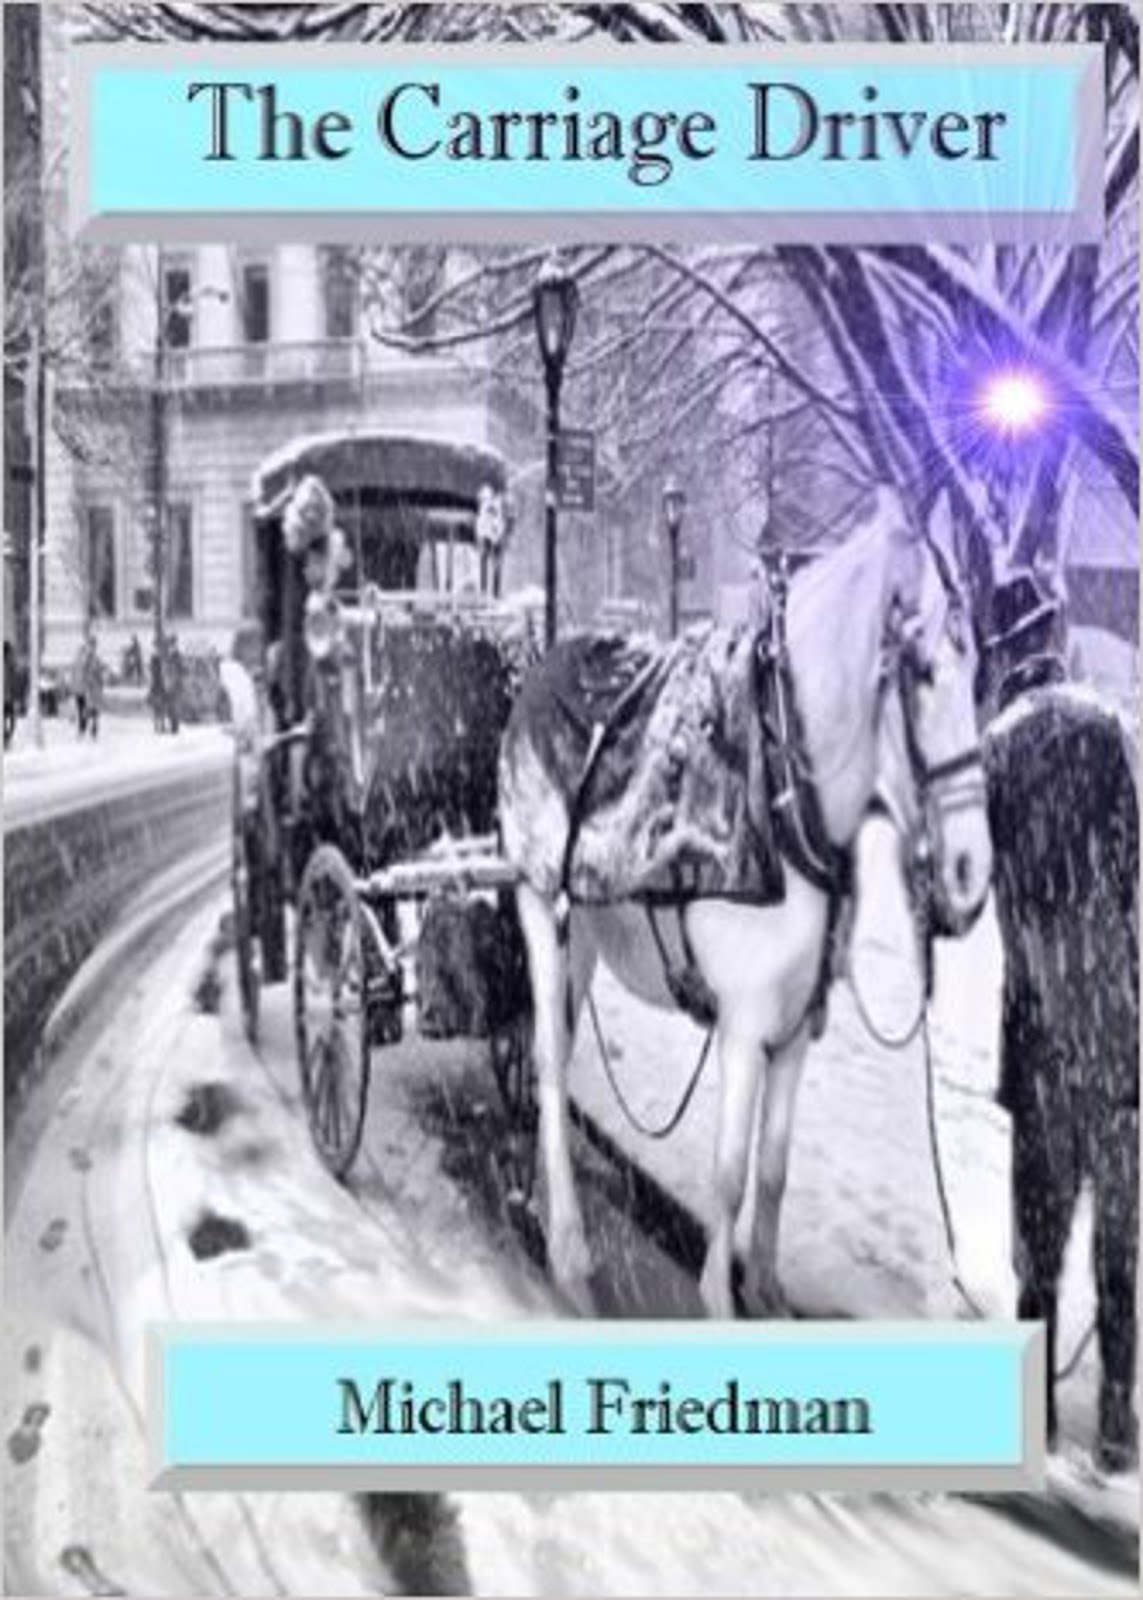 The Carriage Driver by Michael Friedman